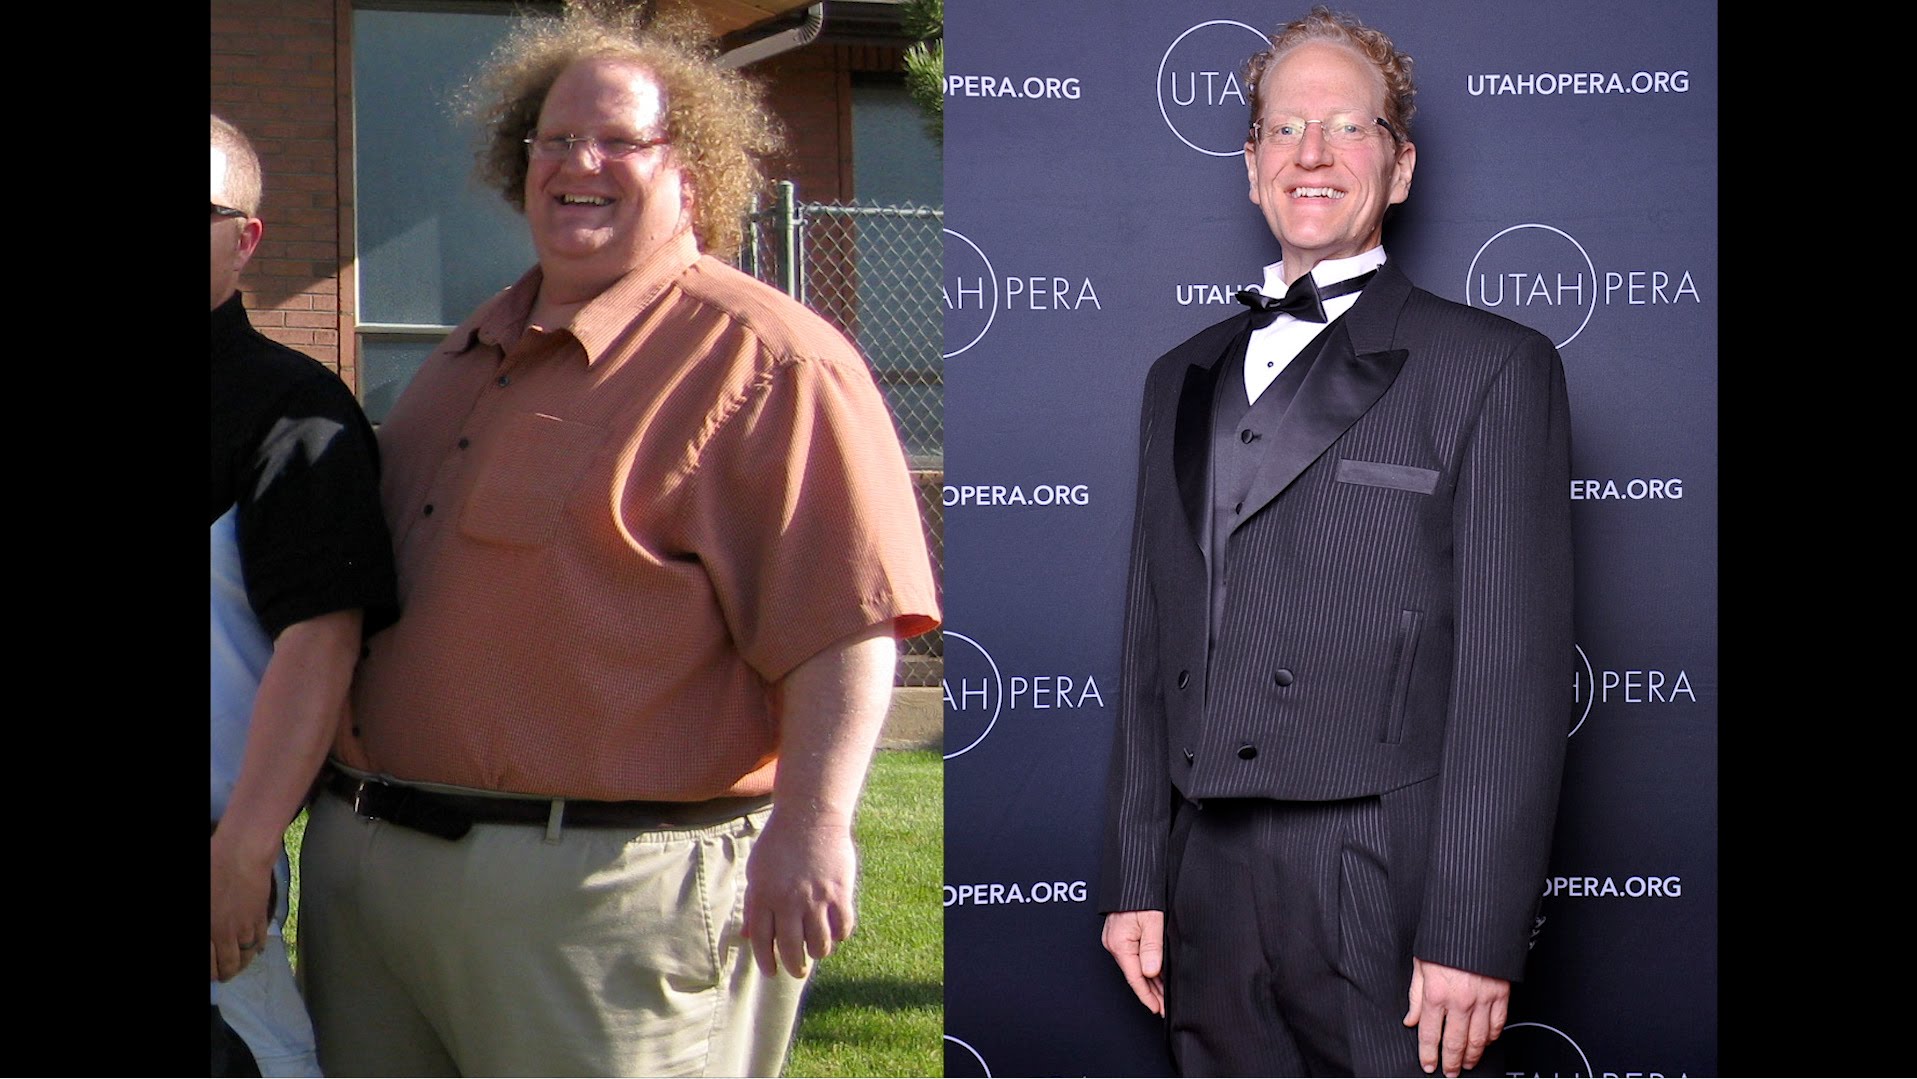 400 lb Man Loses 300 lbs In Stunningly Short Time, But It's His Attitude  That's Most Astounding. – InspireMore